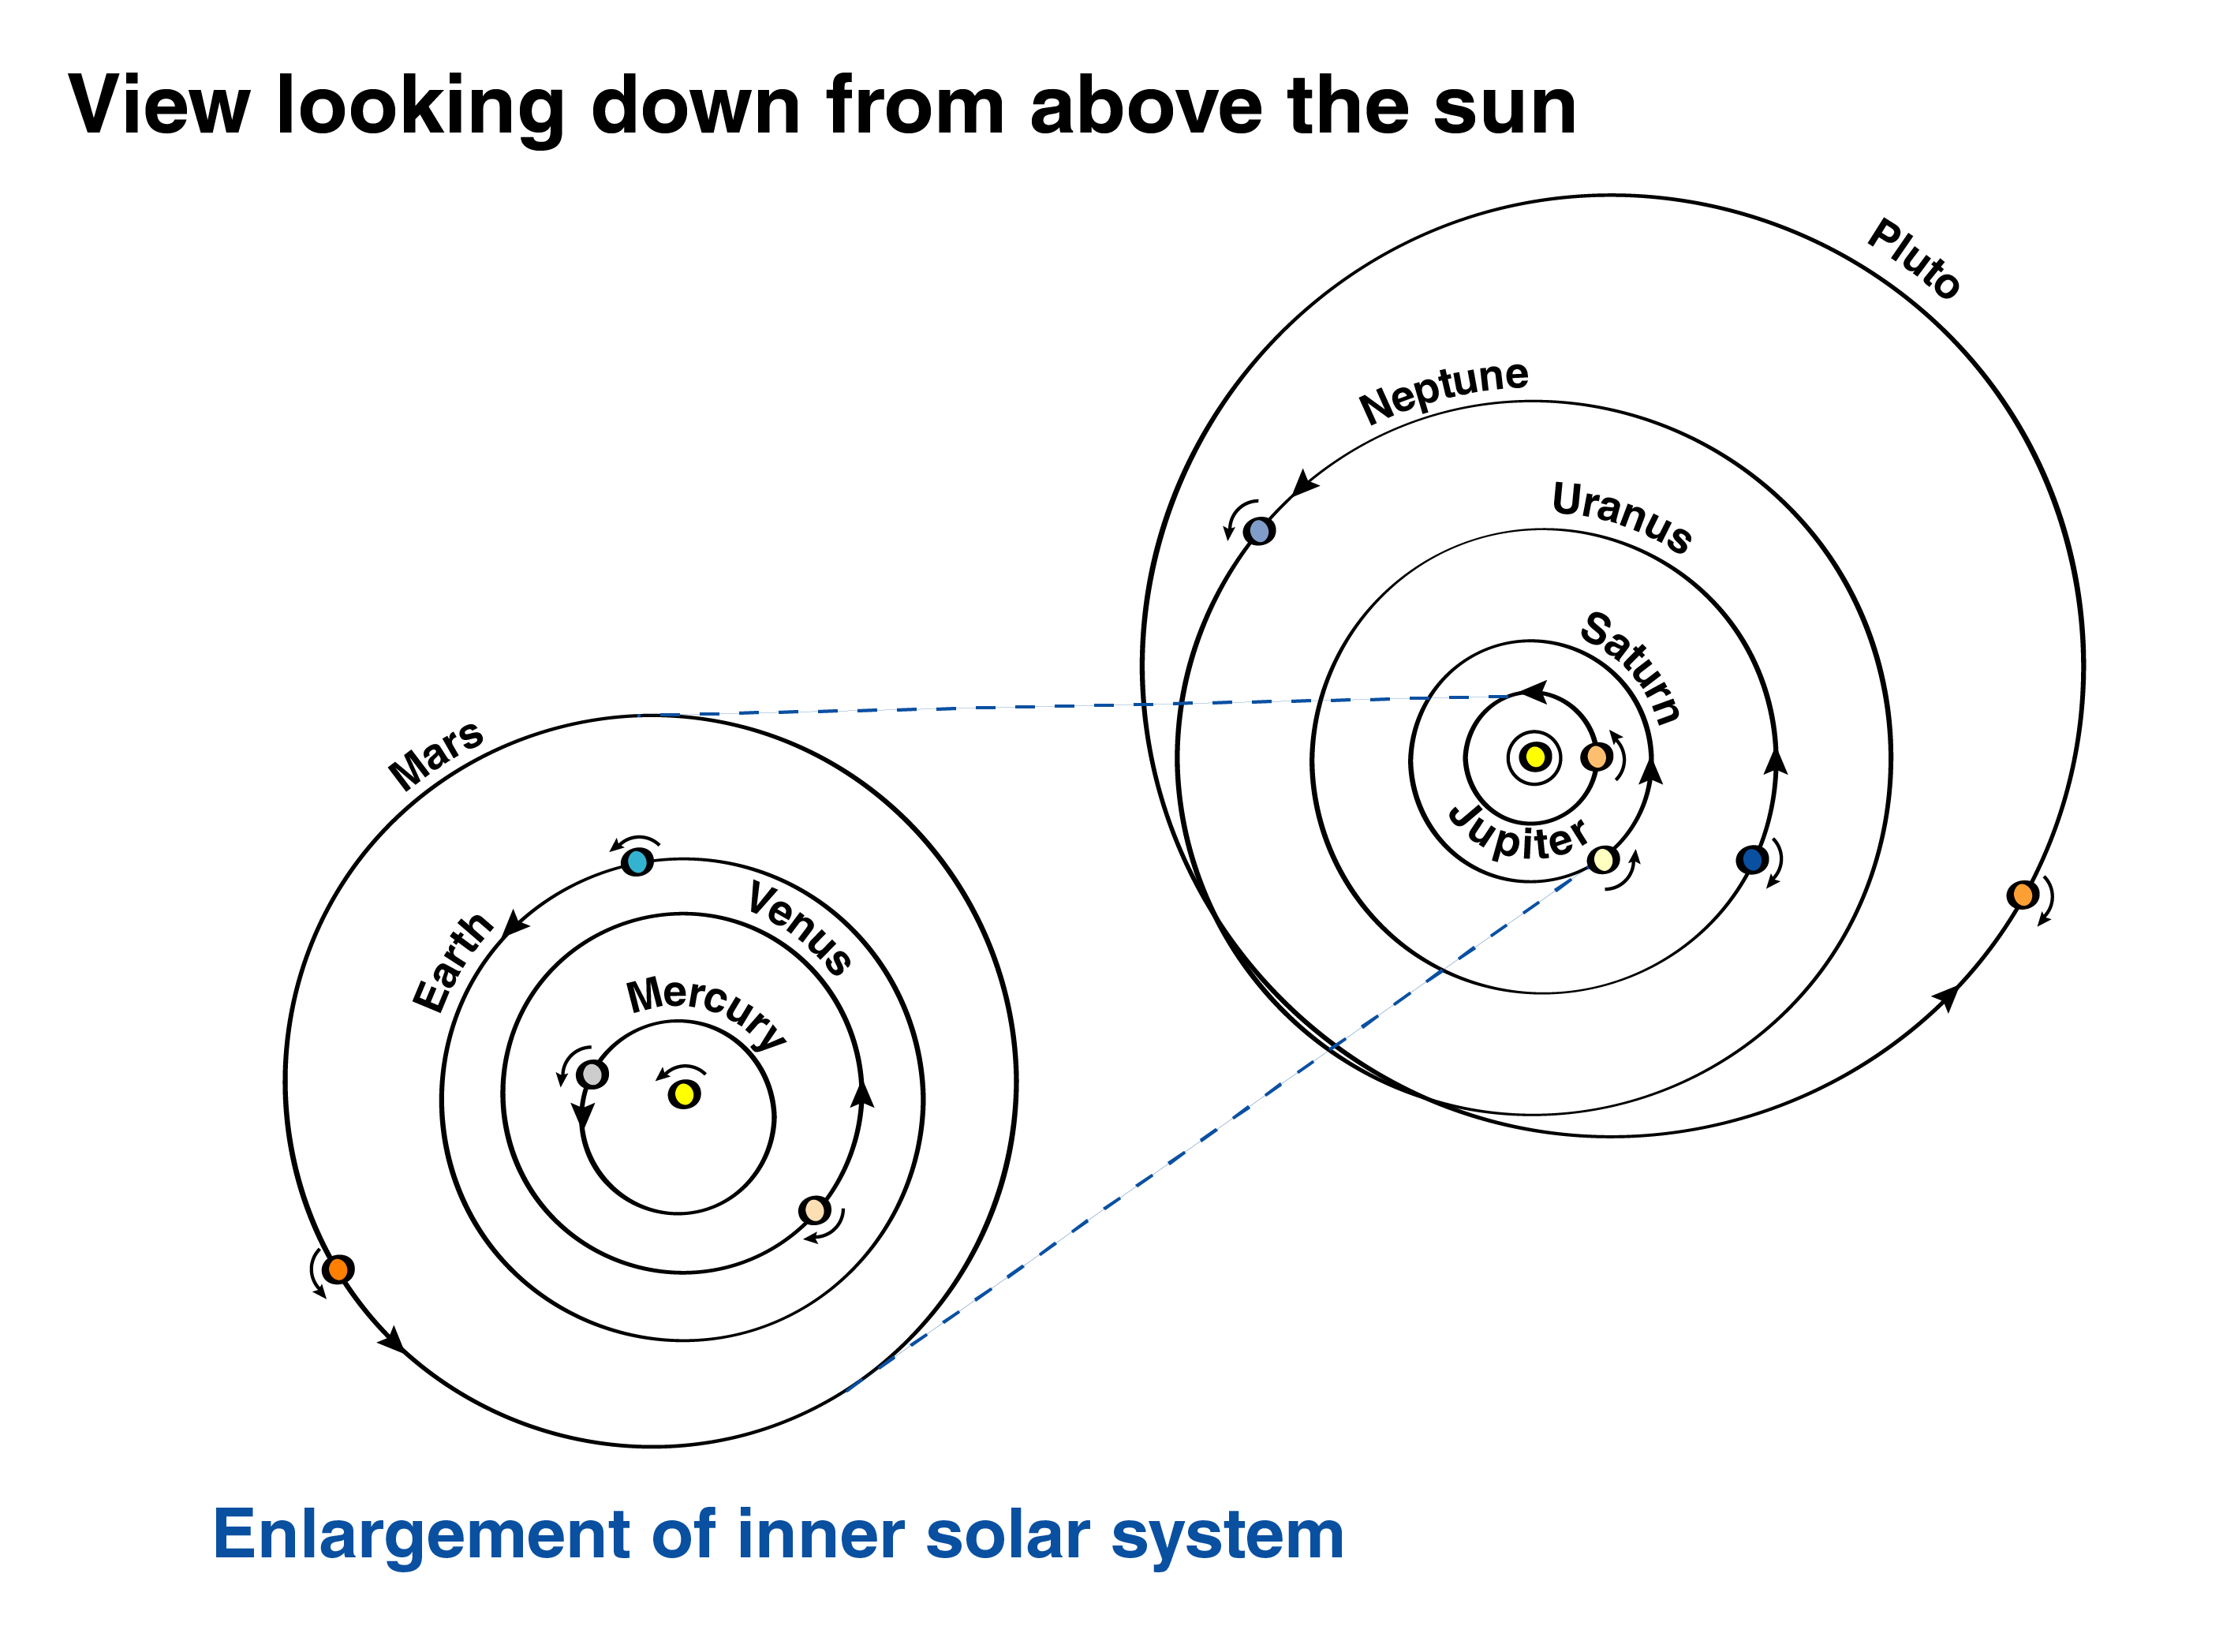 A view of the solar system looking down from above the Sun. The illustration demonstrates Pluto’s unusual orbit. Almost all the planets travel around the Sun in nearly perfect circles. But Pluto does not. It takes an oval-shaped path with the Sun nowhere near its center. Its path is quite tilted. And, Pluto’s spin goes the opposite direction of all the others except Venus and Uranus.